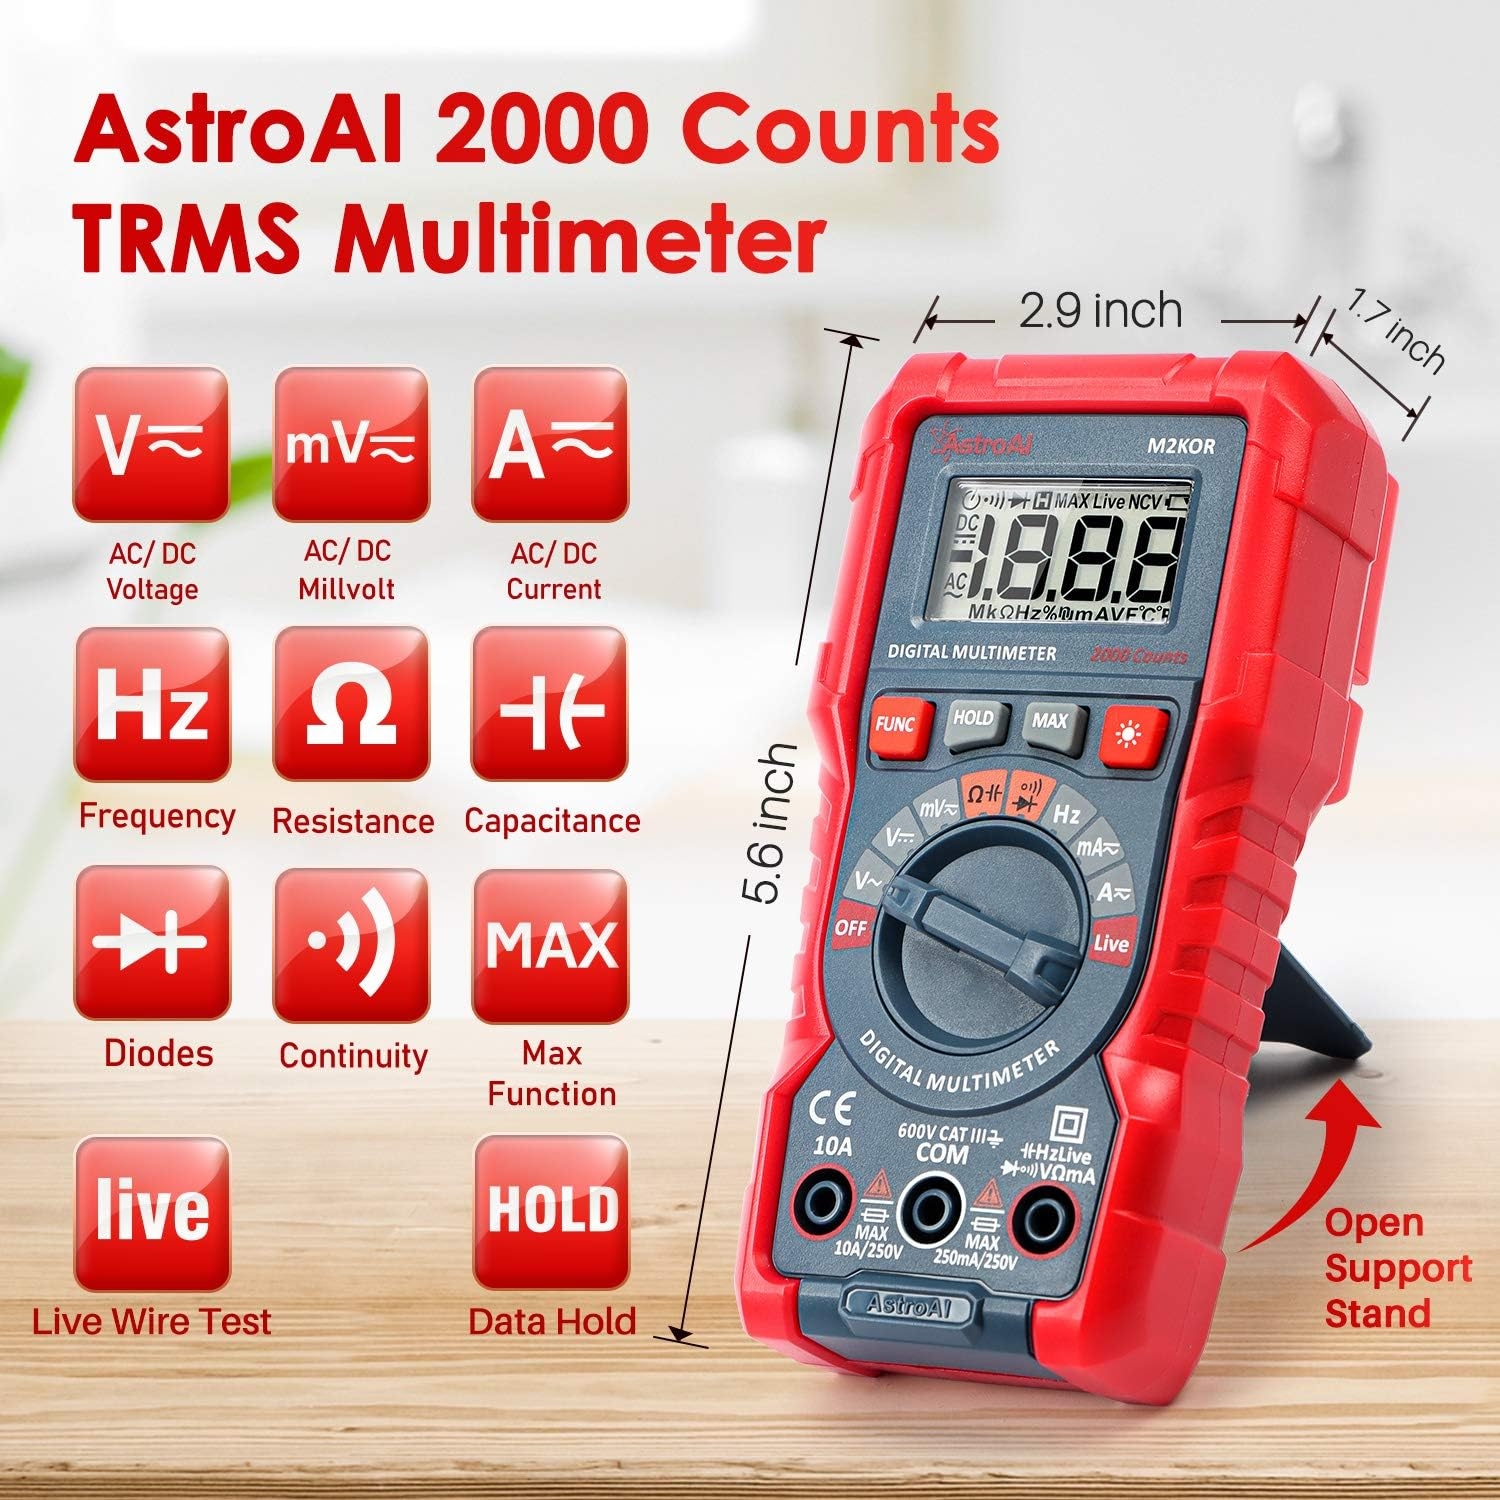 AstroAI Multimeter TRMS 2000 Counts Digital Multimeter with DC AC Voltmeter and Auto Ranging Tester ; Measures Voltage, Current, Capacitance; Tests Live Wire, Continuity